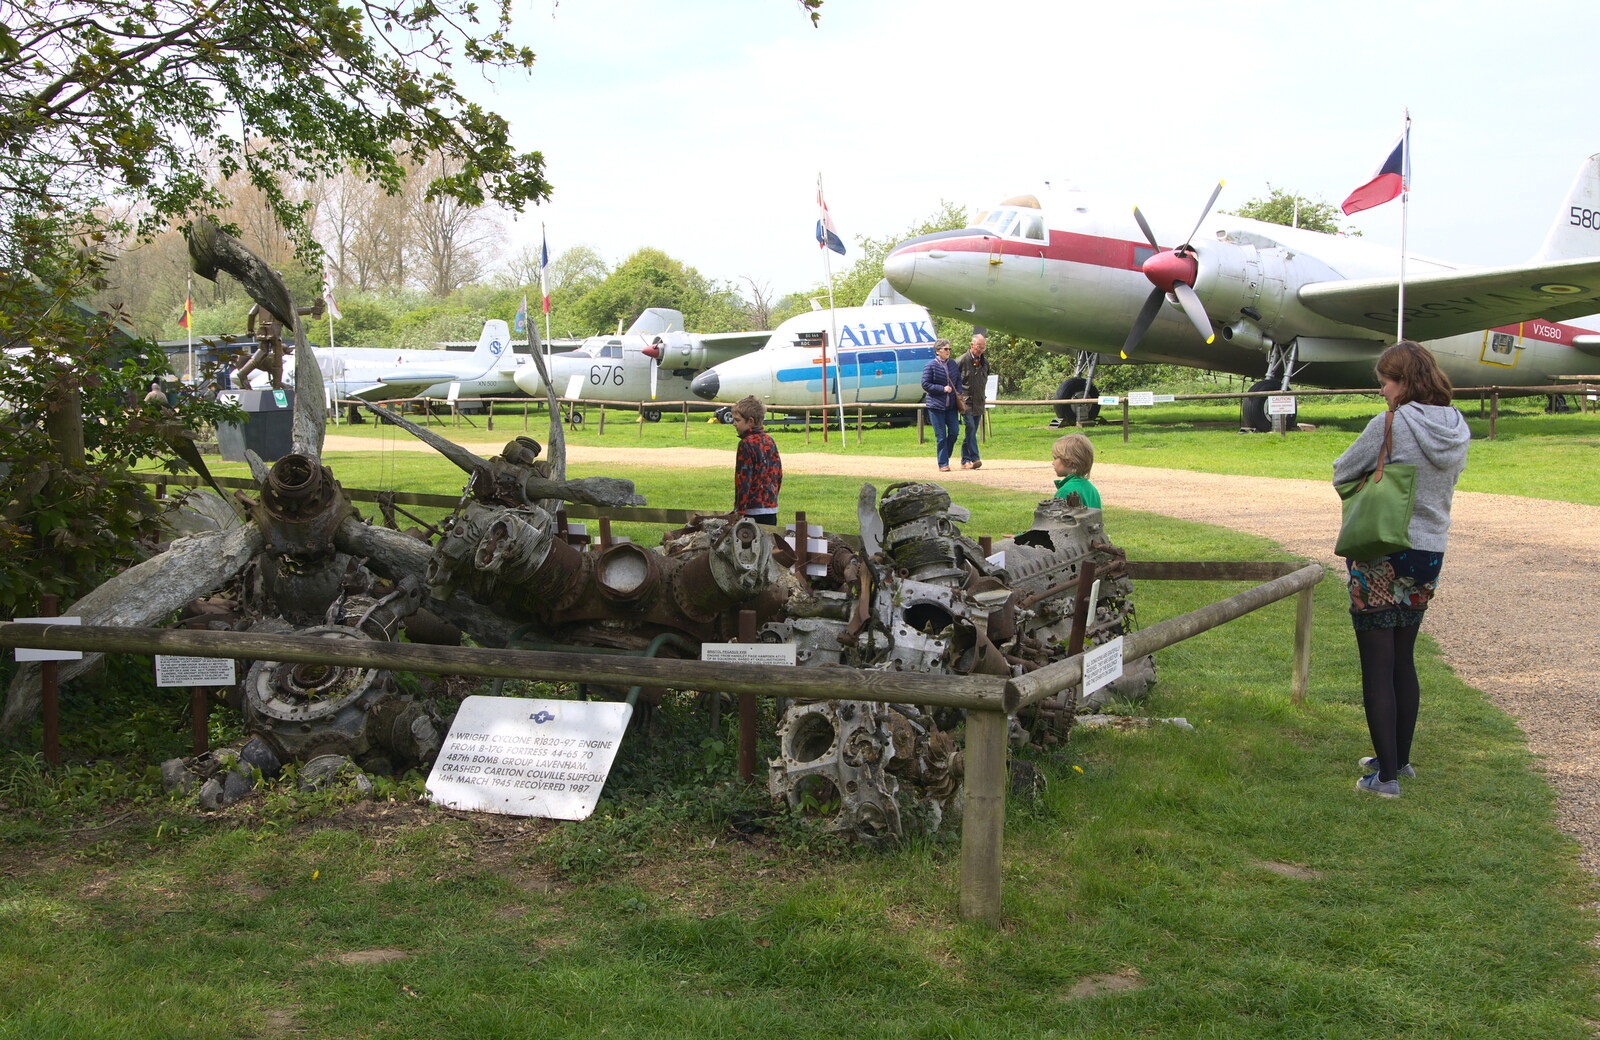 Isobel looks at a pile of wreckage from Norfolk and Suffolk Aviation Museum, Flixton, Suffolk - 30th April 2017